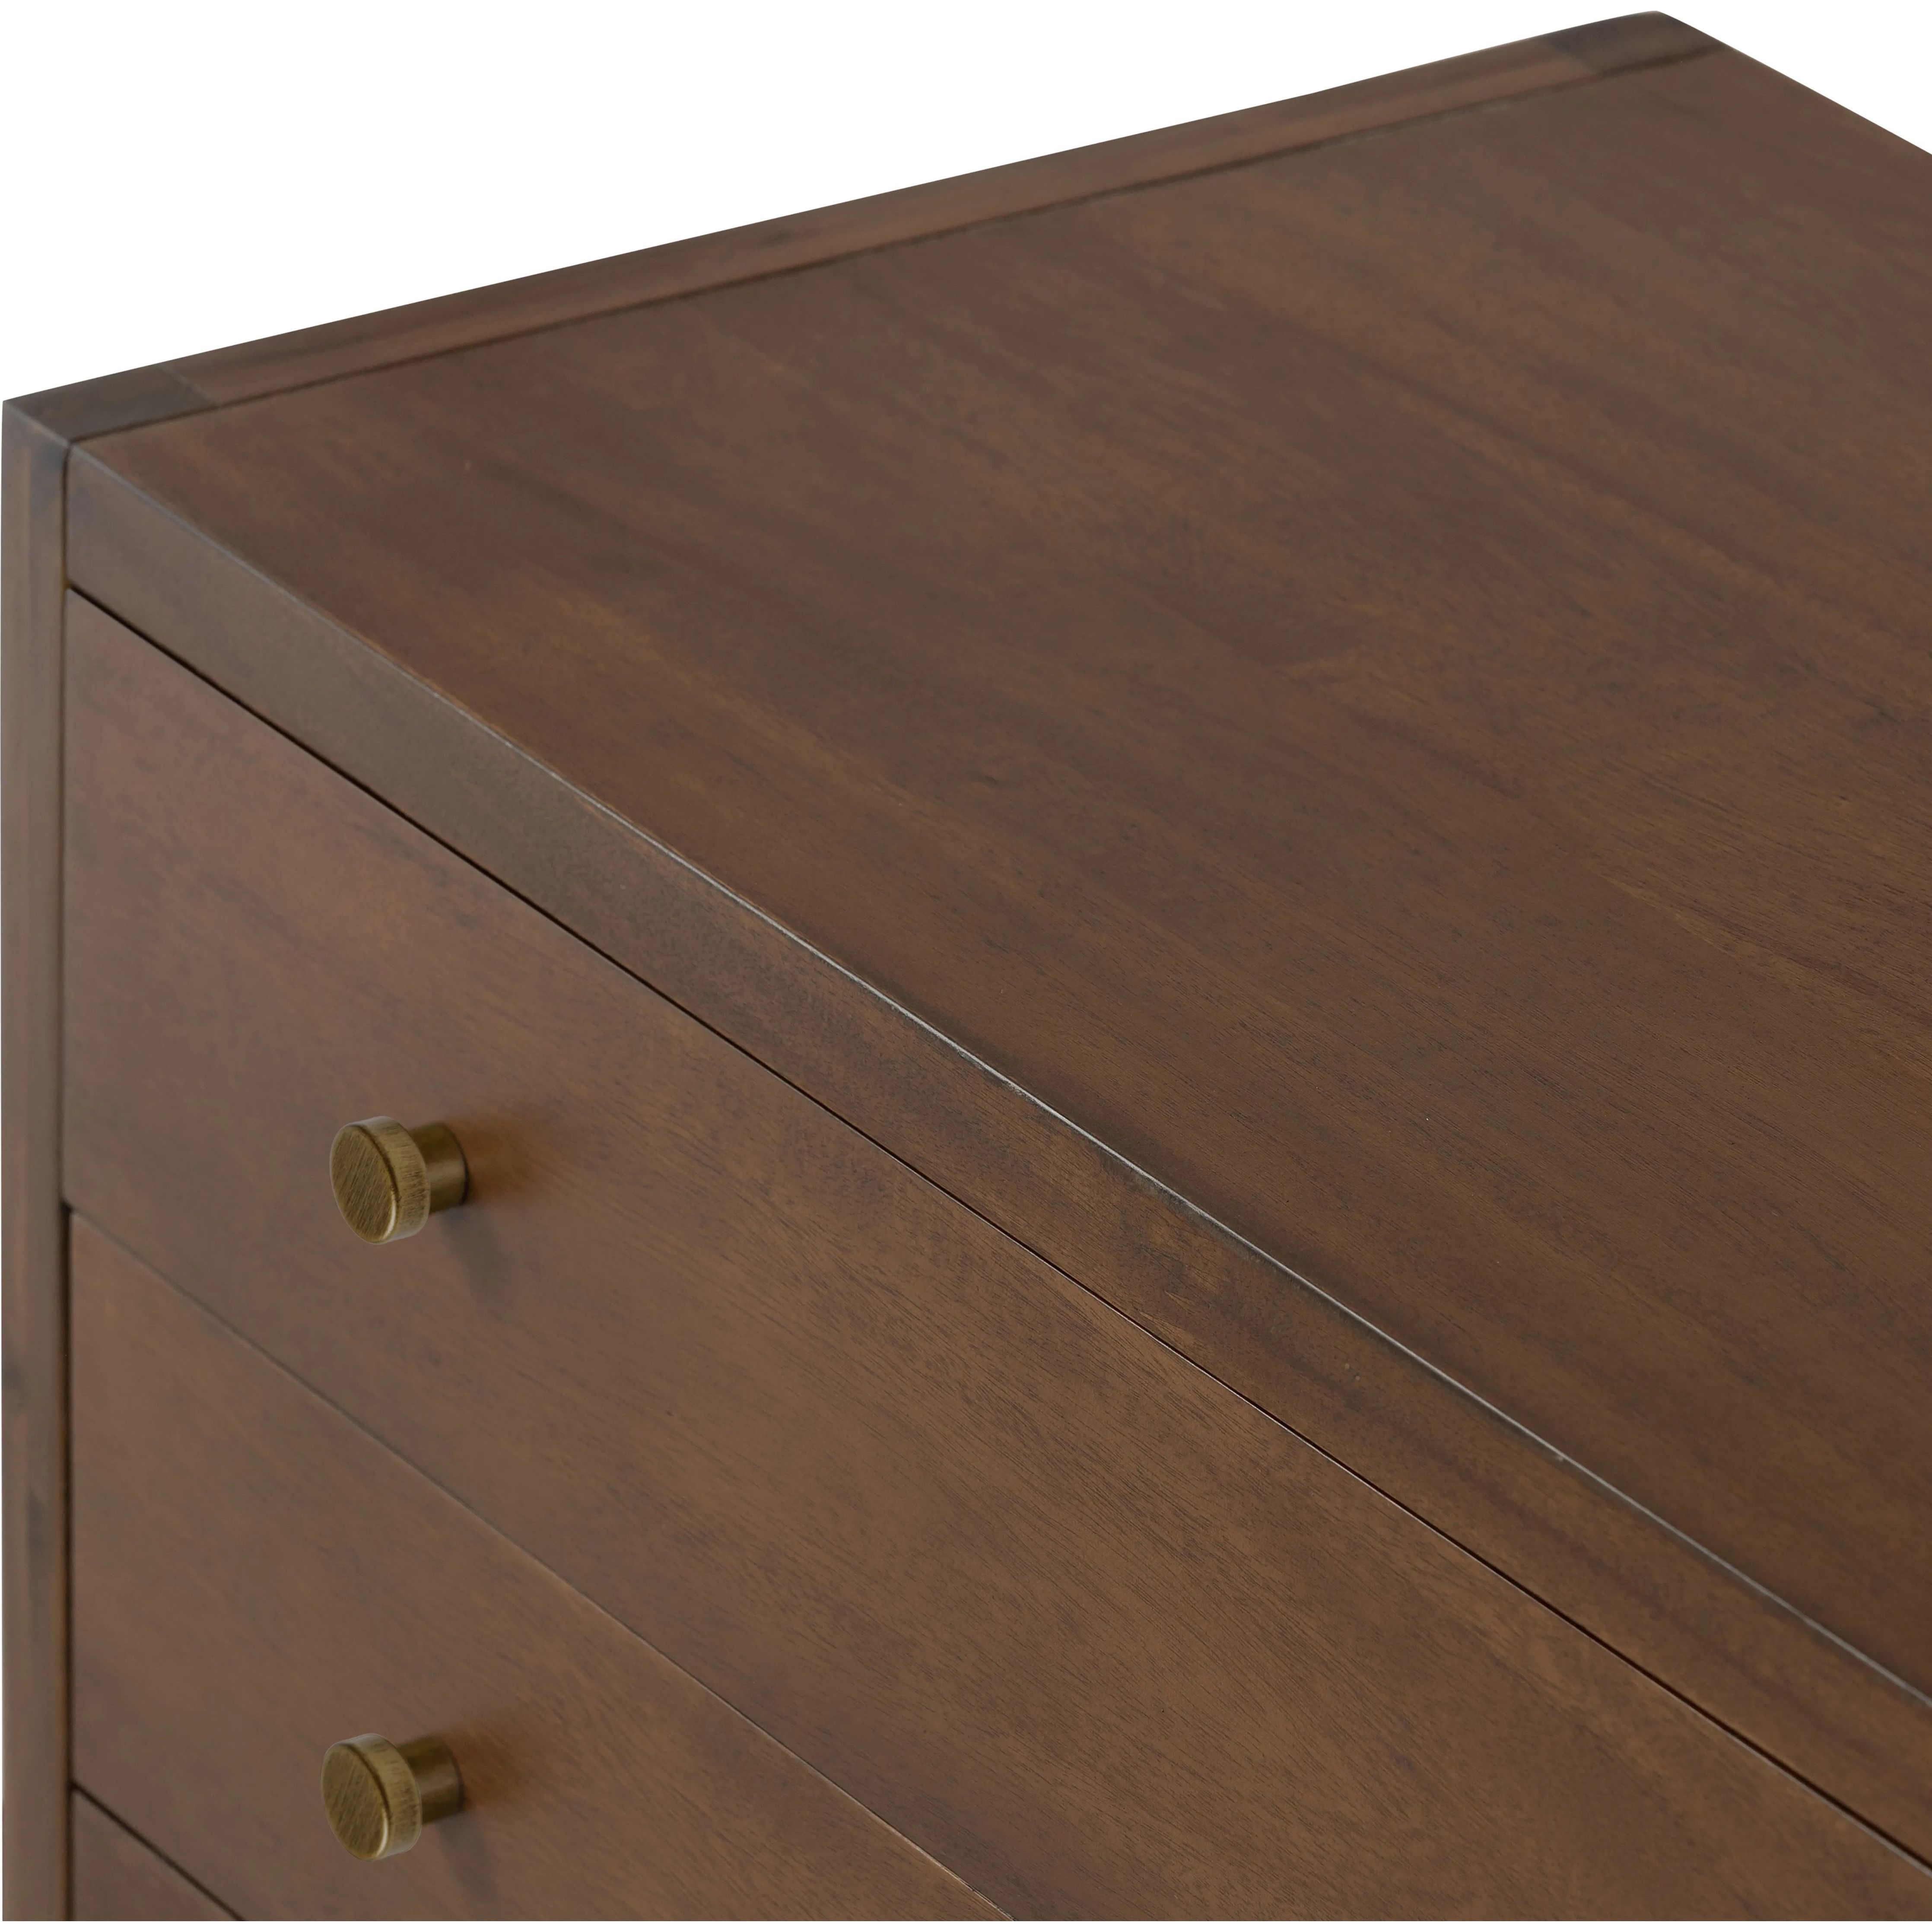 A simple, heavy wood Parsons-style nightstand with three drawers for ample storage. Finished in solid ash with brass hardware Amethyst Home provides interior design, new home construction design consulting, vintage area rugs, and lighting in the Dallas metro area.